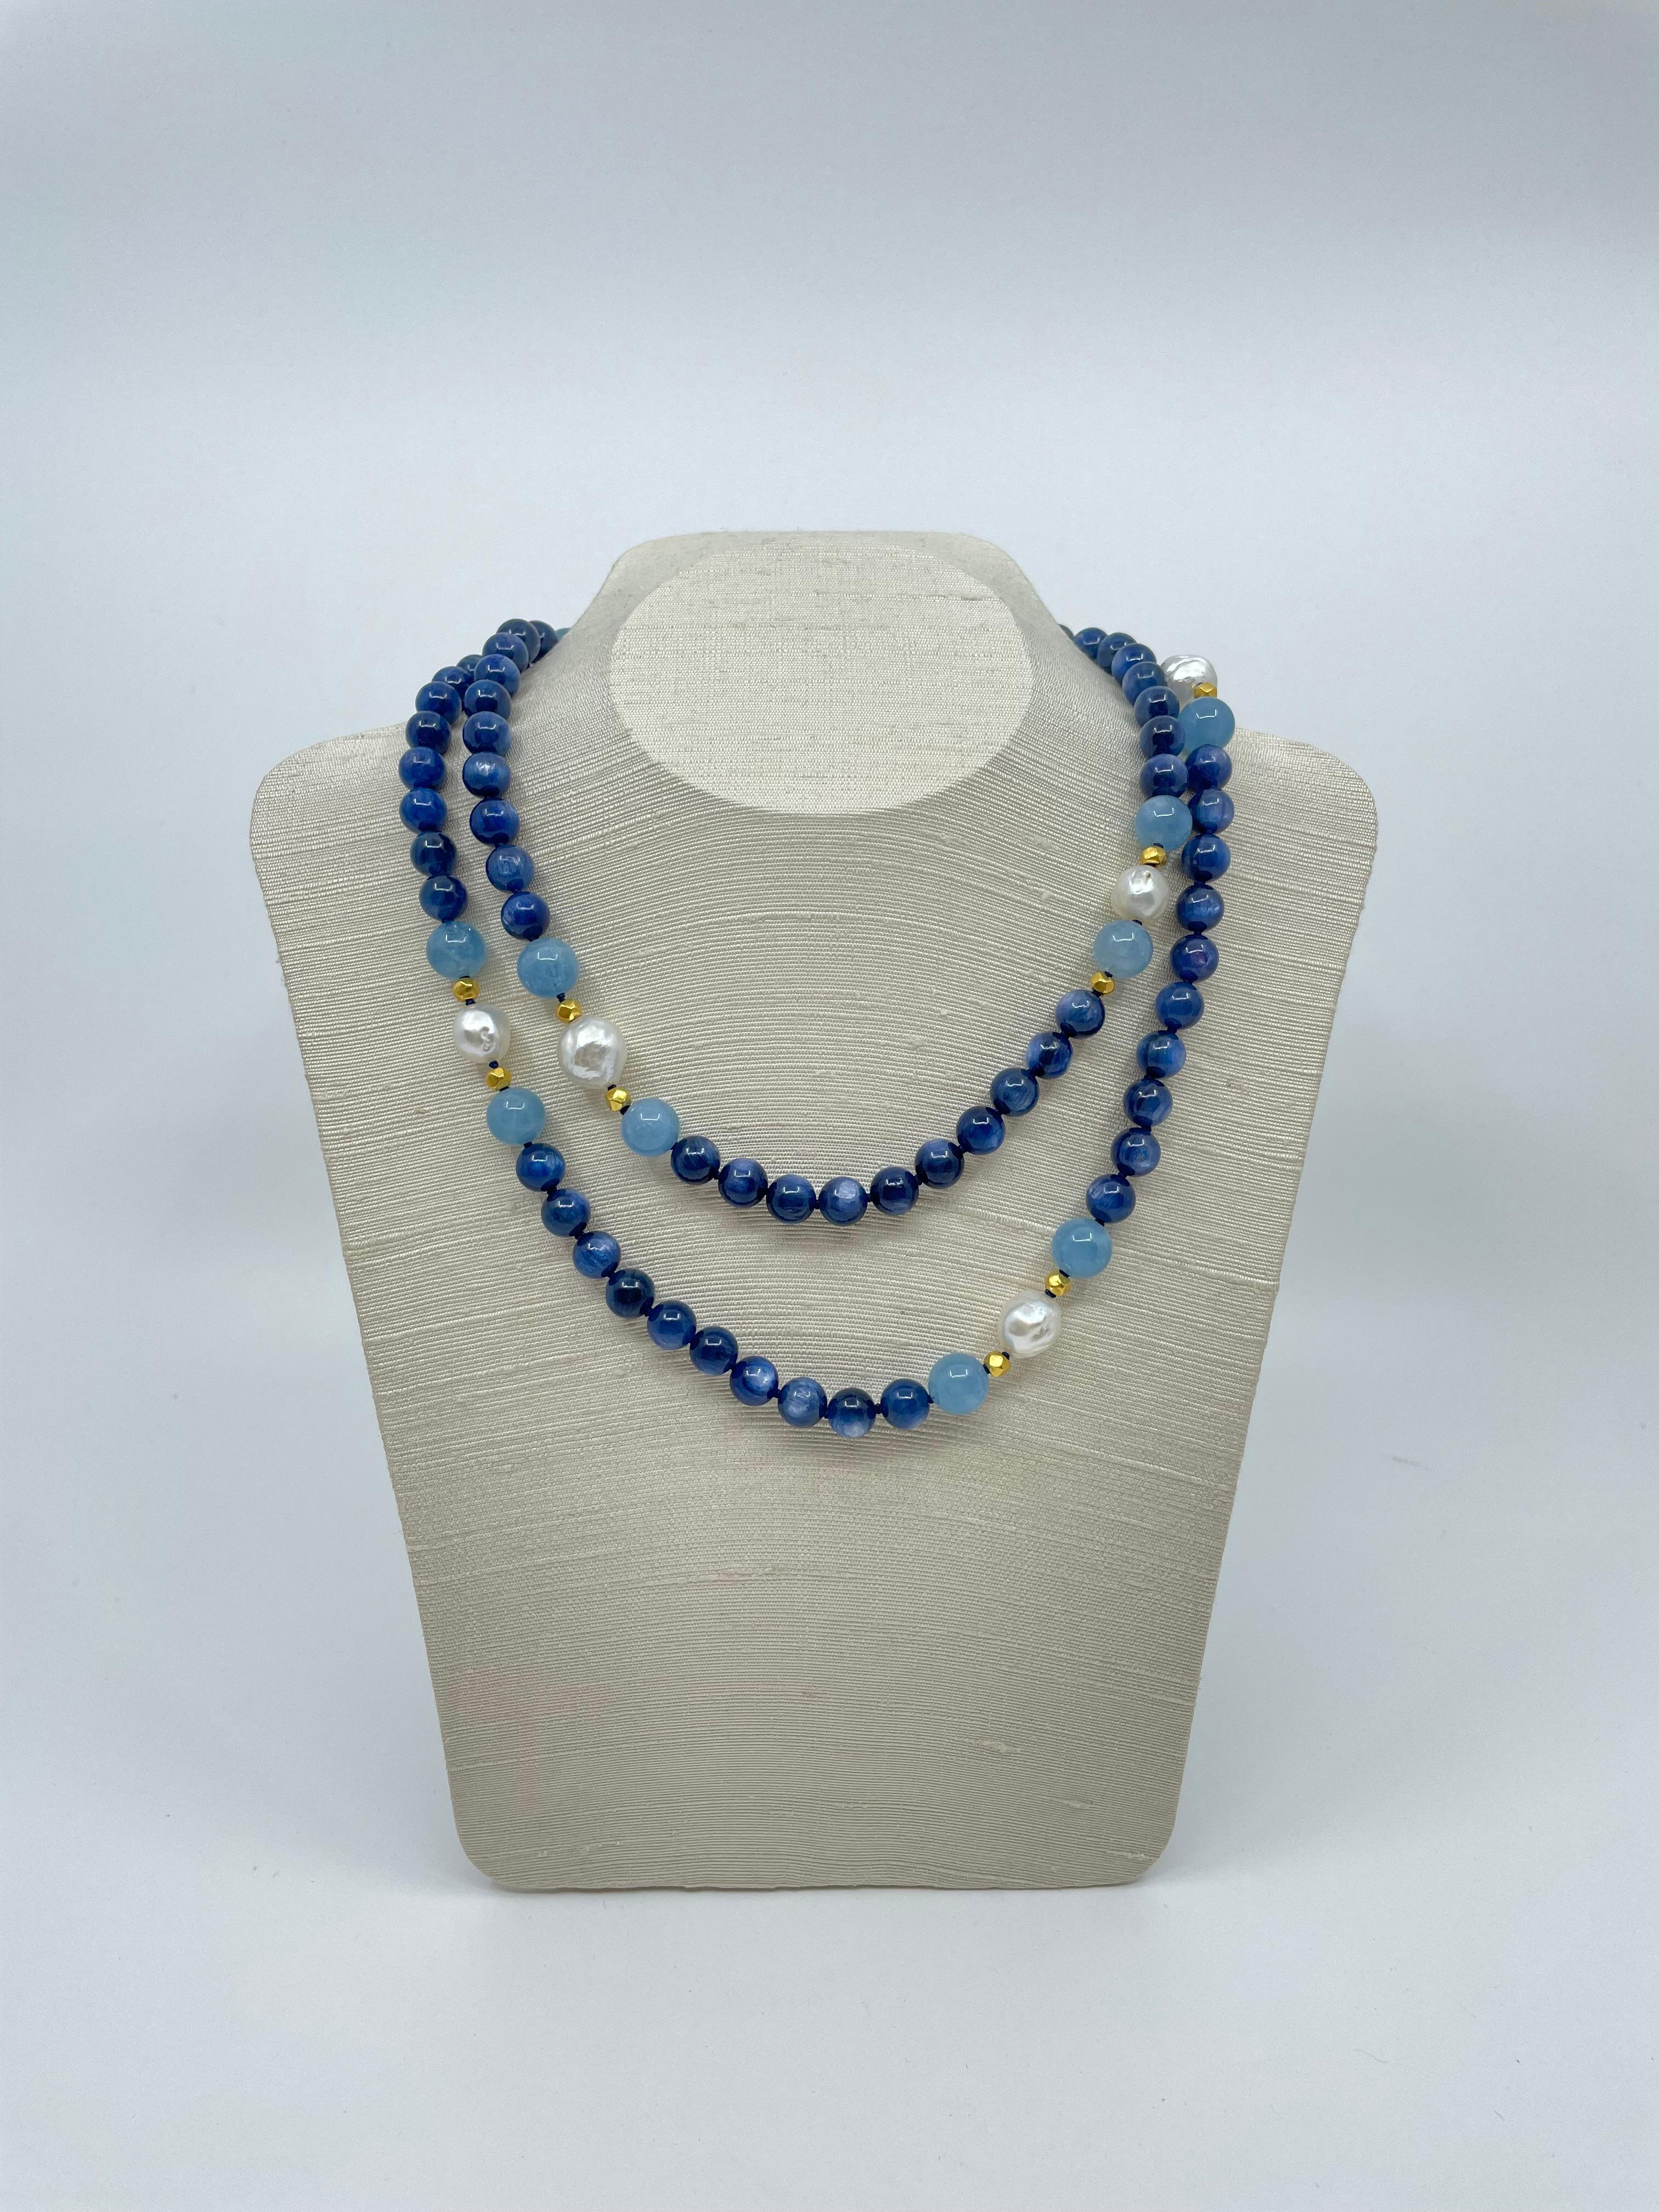 Long Necklace with Kyanite, Aquamarine, South Sea Pearls & 18K Solid Gold Beads For Sale 5